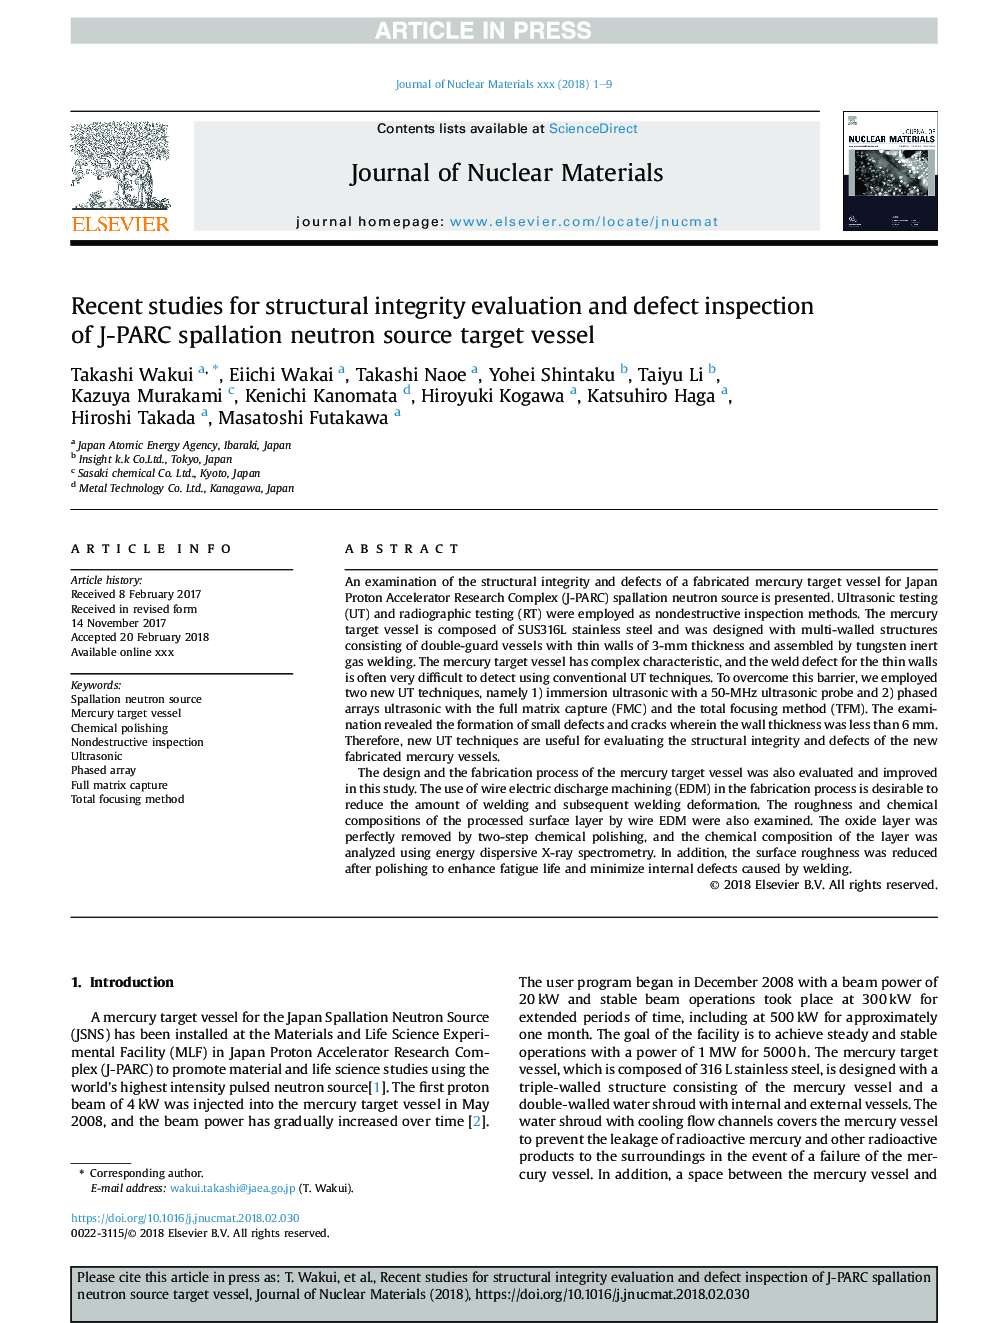 Recent studies for structural integrity evaluation and defect inspection of J-PARC spallation neutron source target vessel